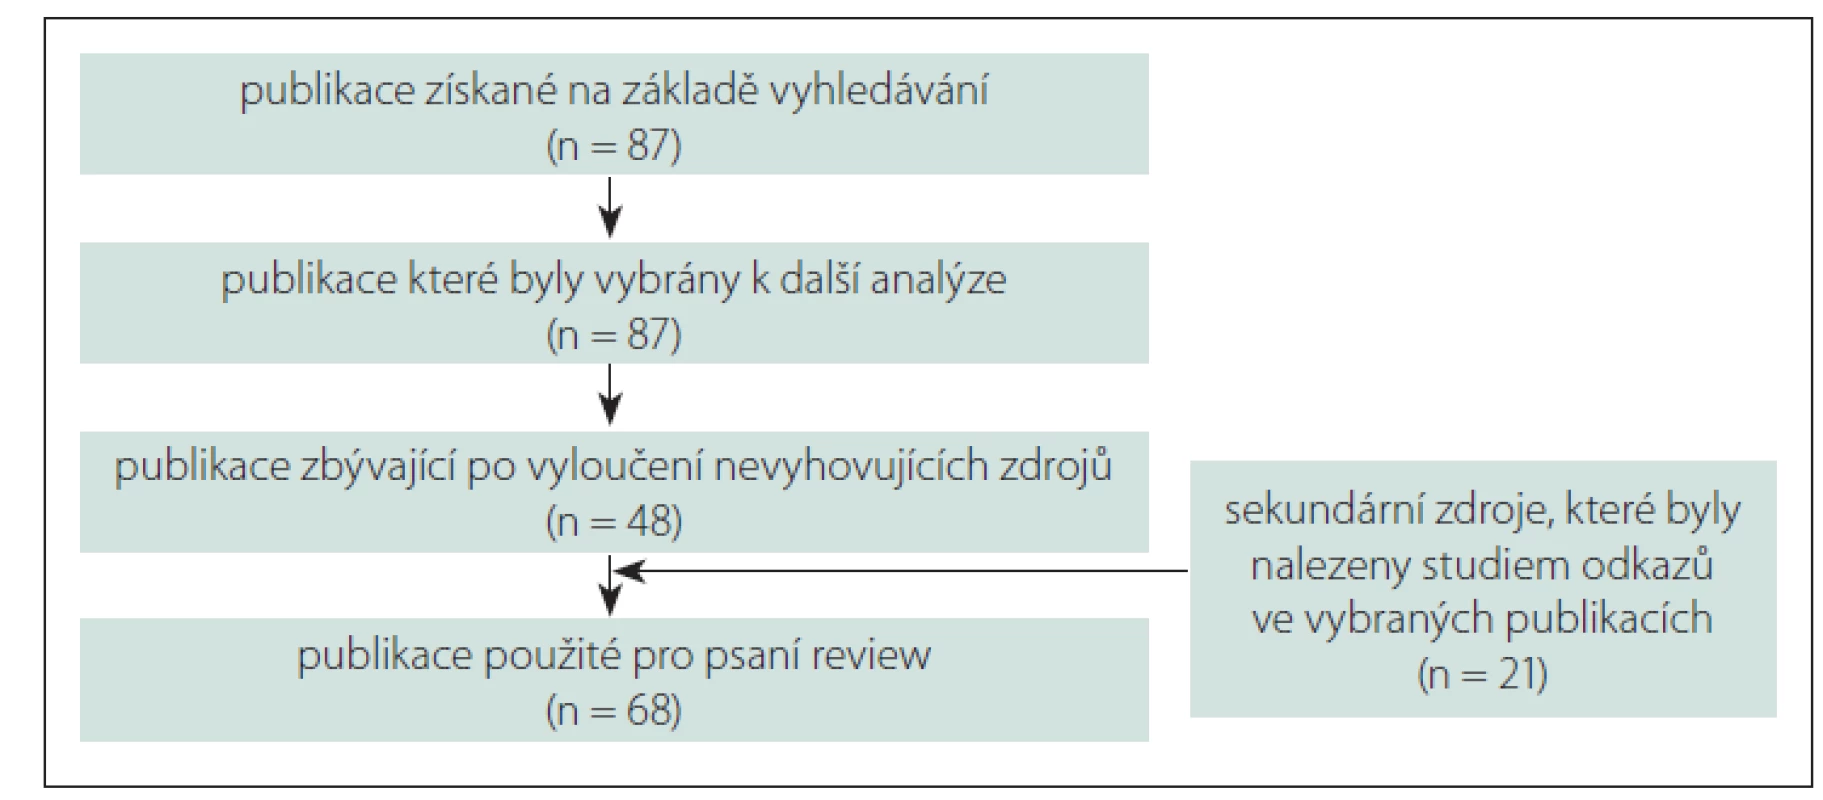 Schéma výběru článků pro psaní systematické review.<br>
Fig. 1. Diagram of the selection process for inclusion of the articles in the systematic review.